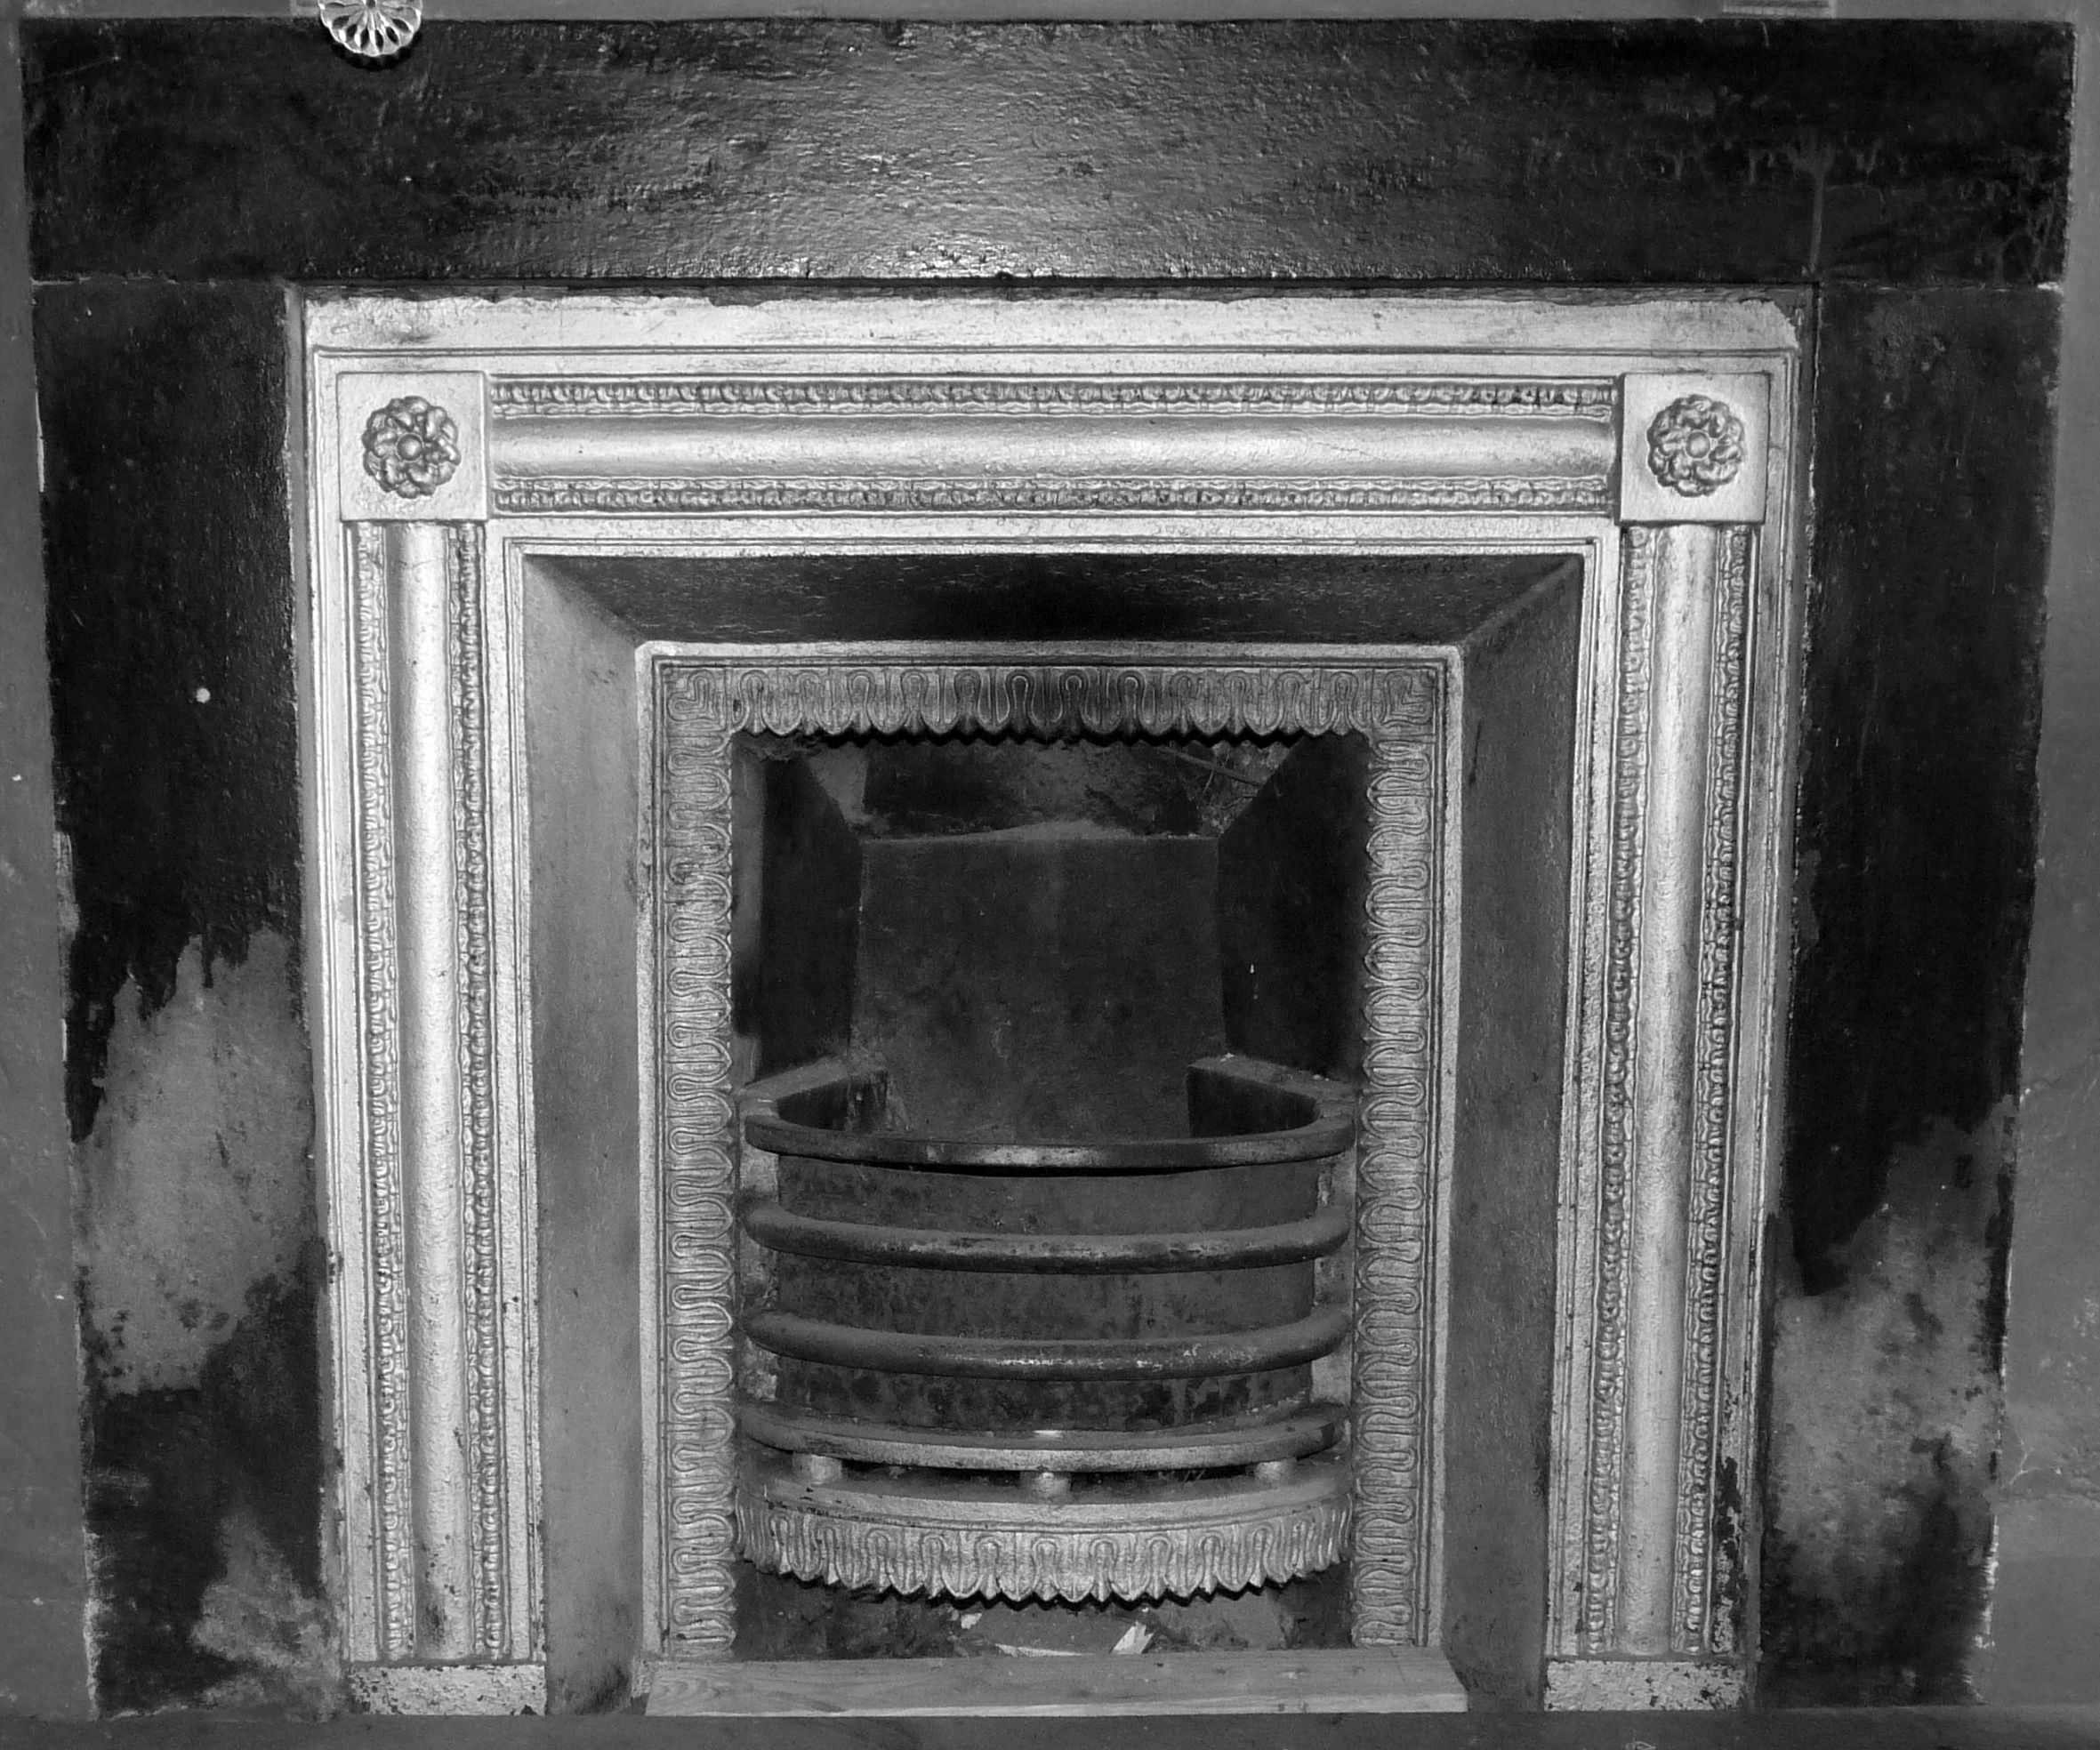 Cast Fireplaces Unique Cast Iron Fireplace In the Bedroom Painted Silver sometime